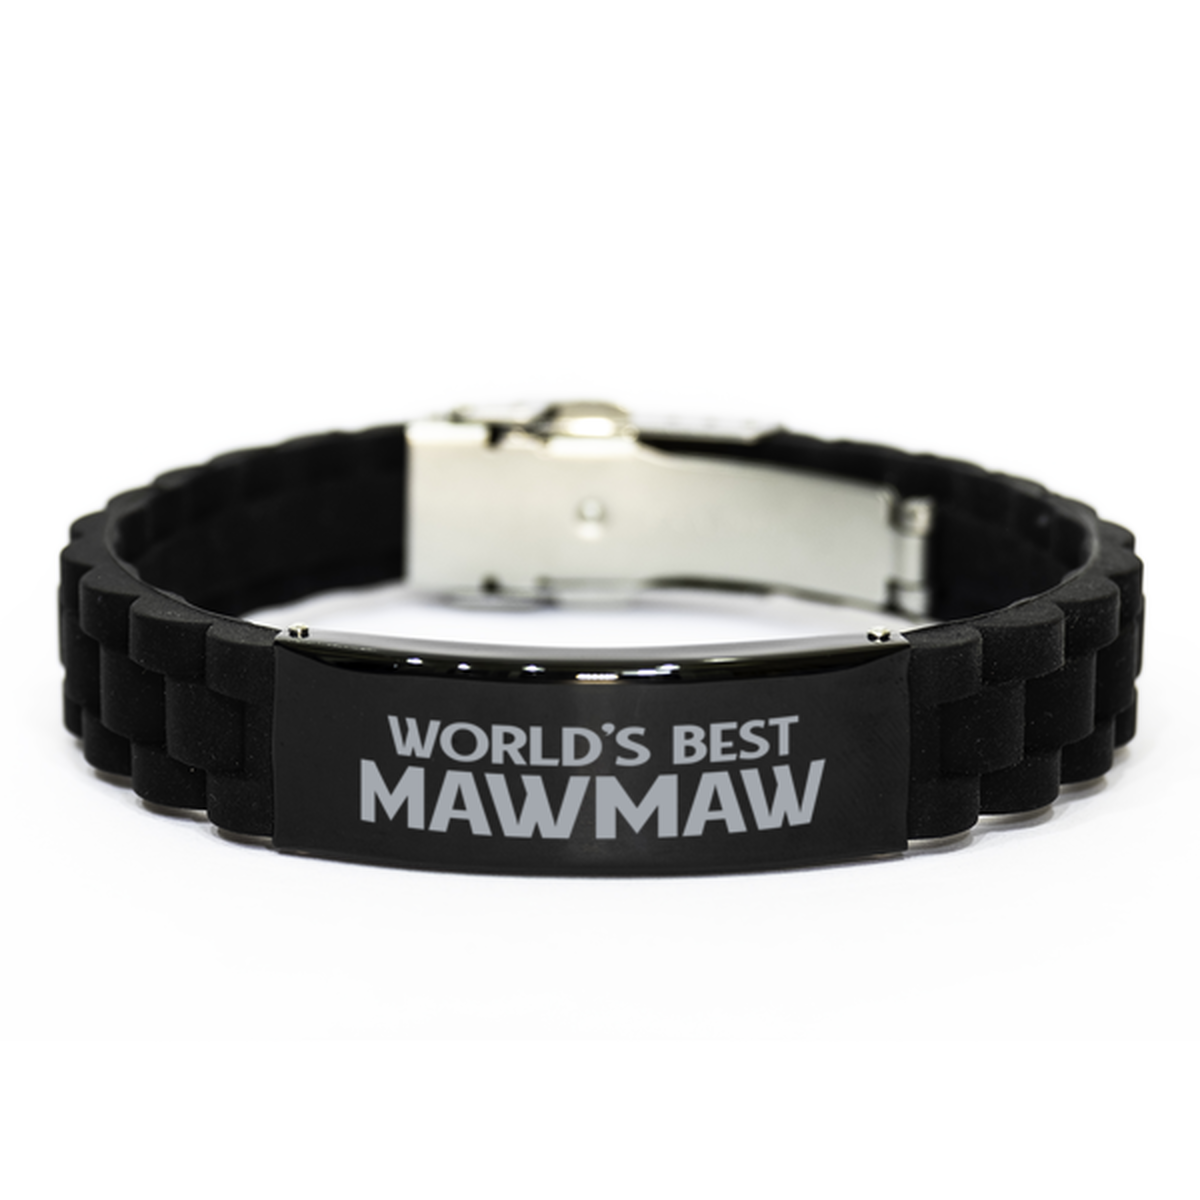 World's Best Mawmaw Gifts, Funny Black Engraved Bracelet For Mawmaw, Family Gifts For Women